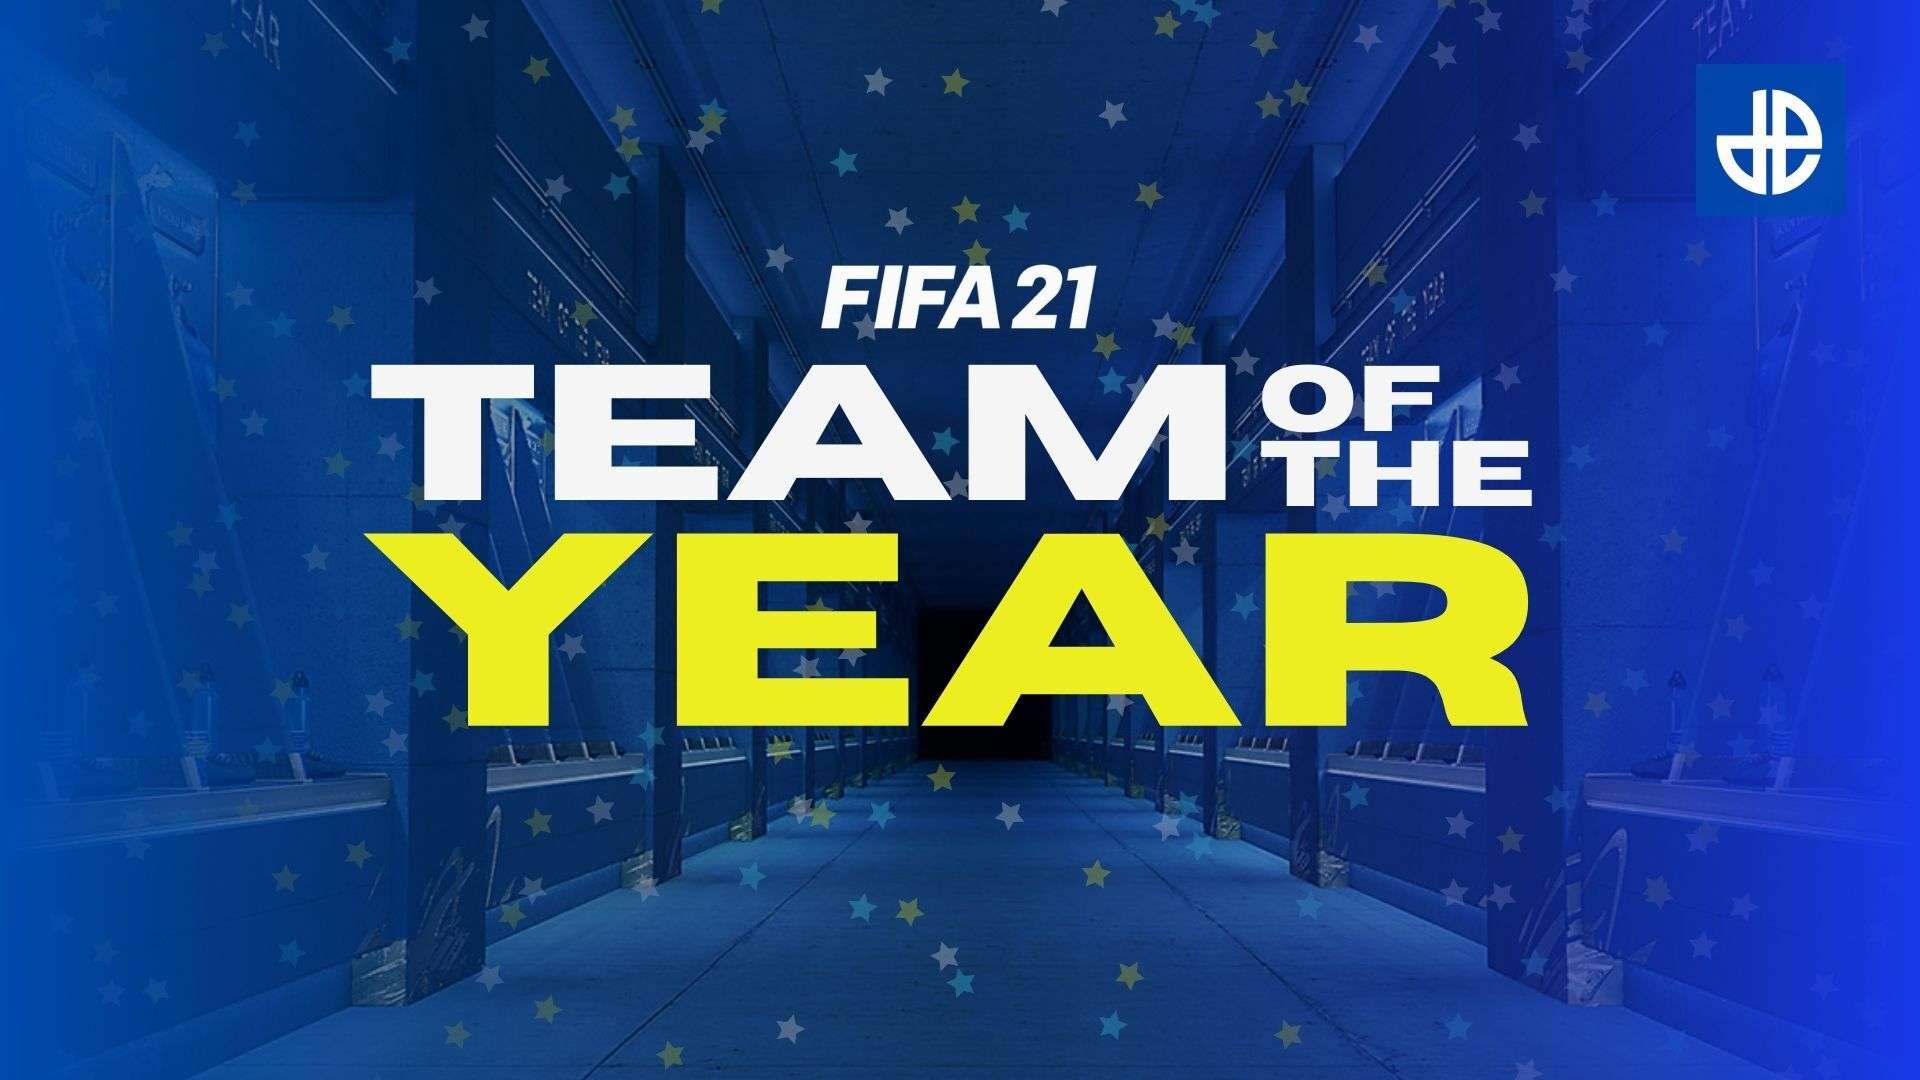 FIFA 21 team of the year